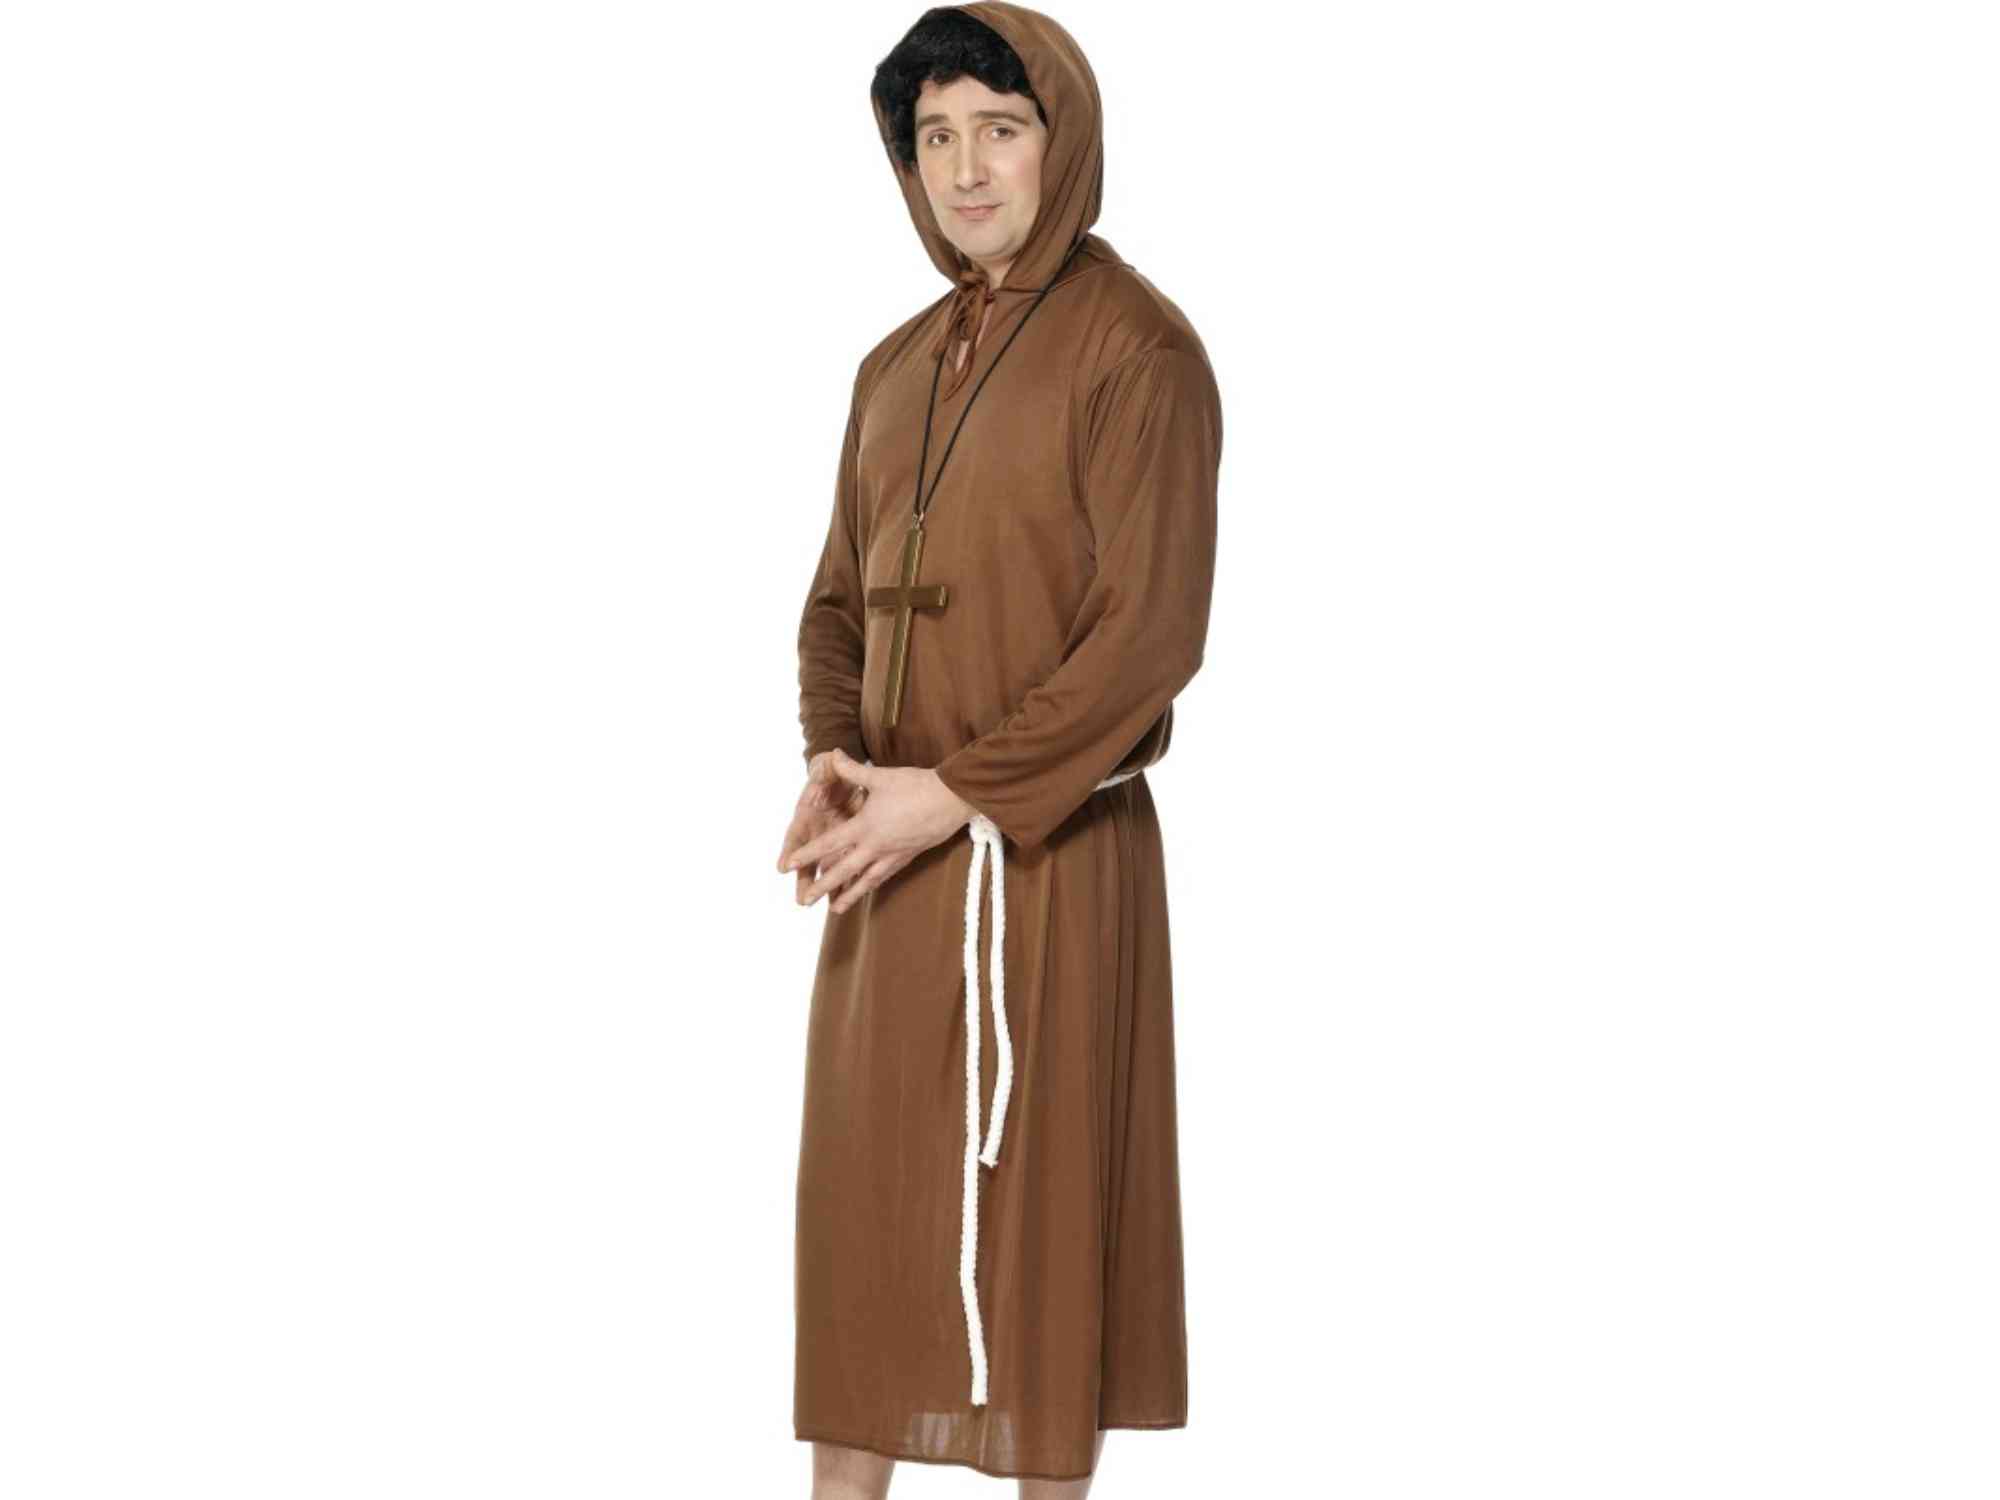 Cheap Stag Do Costumes - Monk